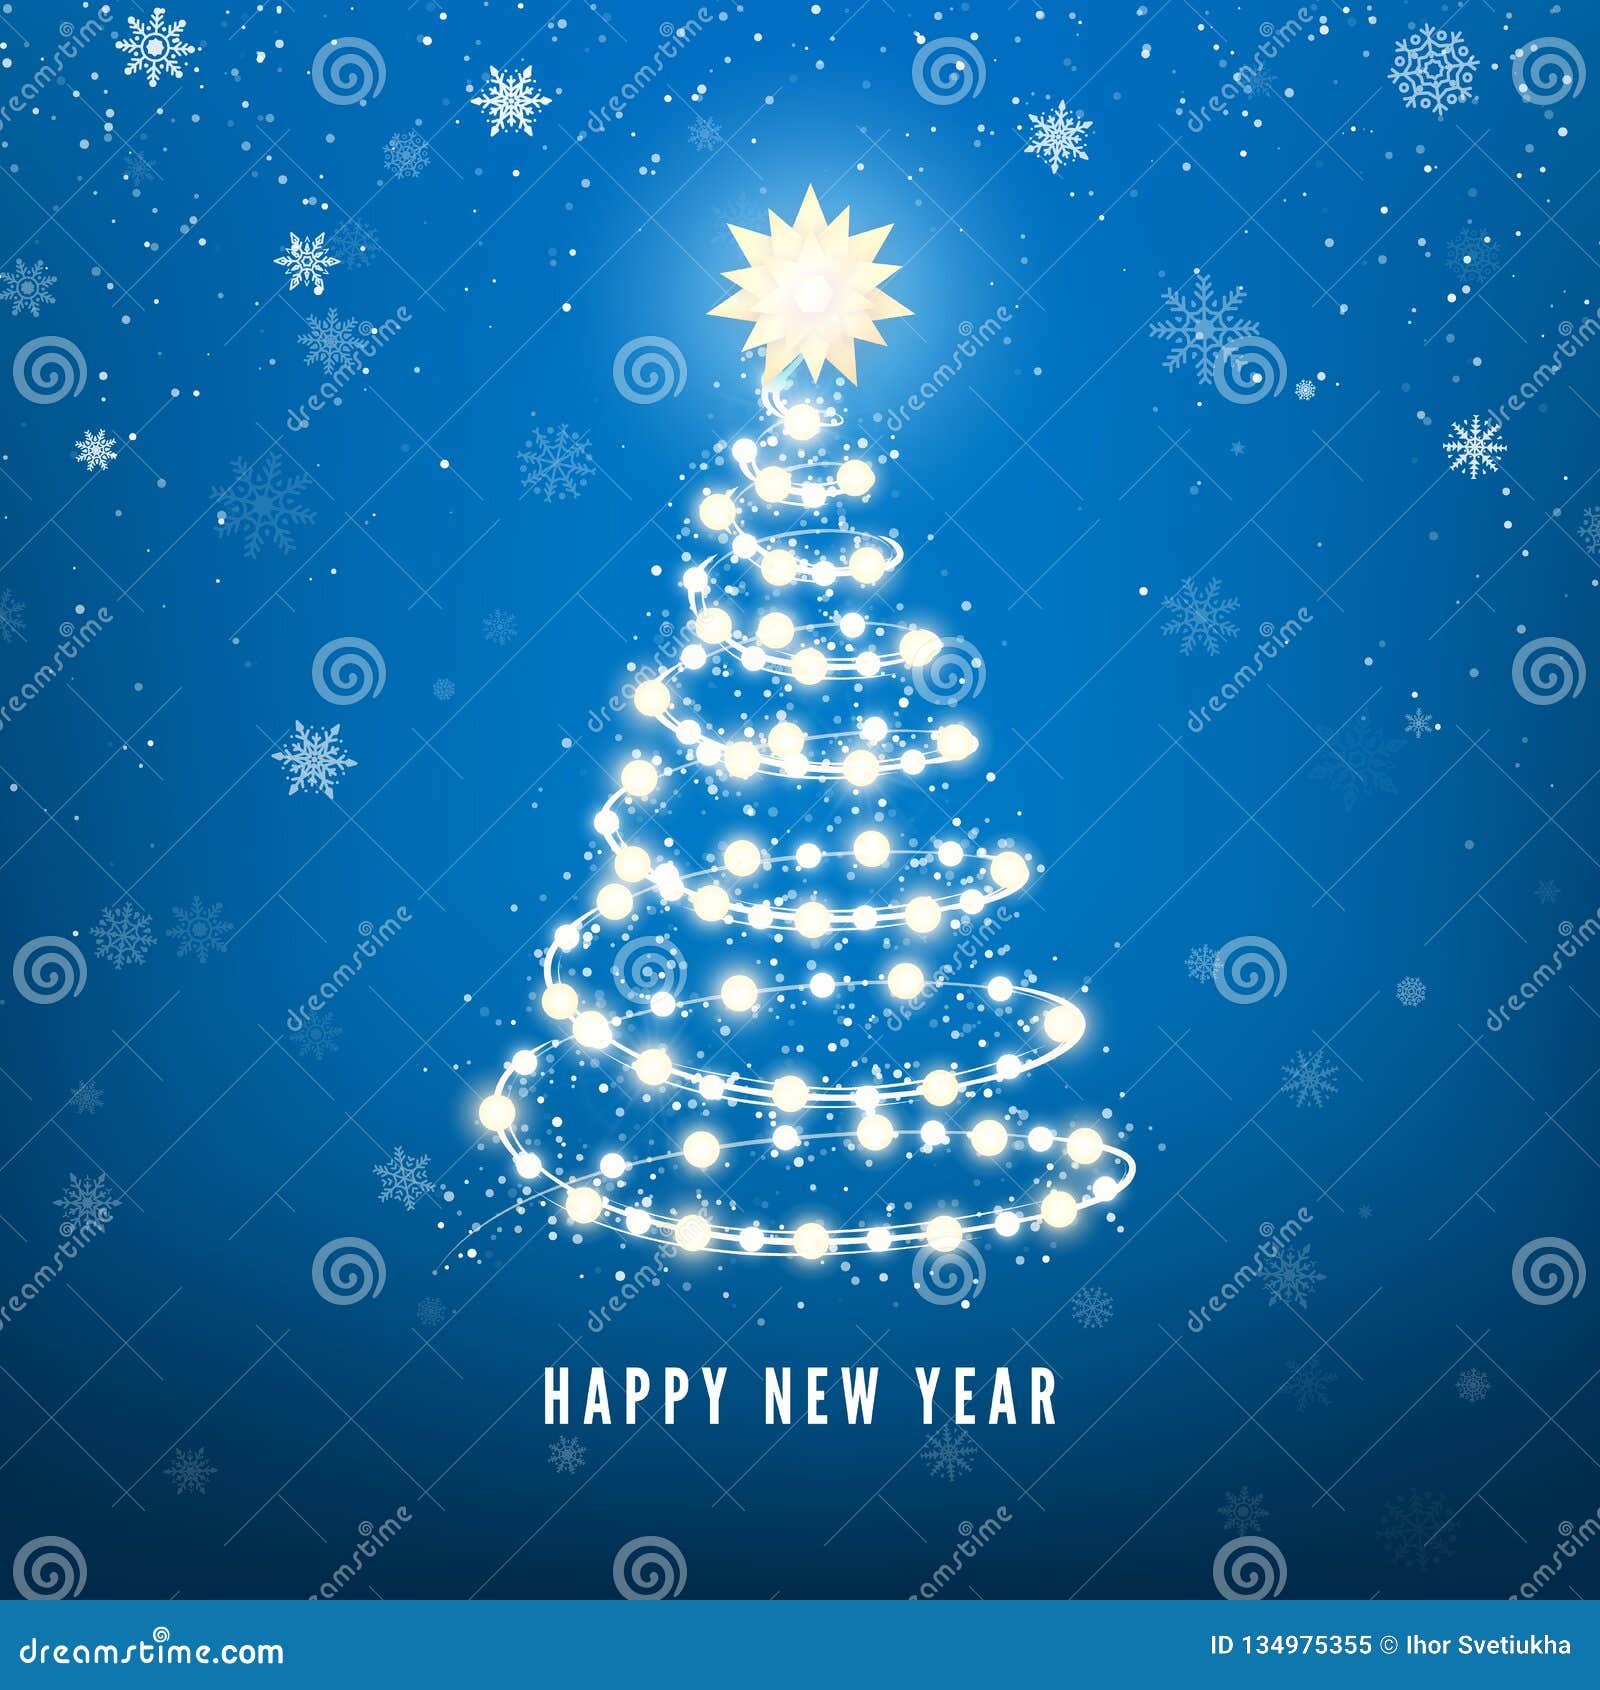 new year tree silhouette made of christmas lights on blue background. magic chistmas snowfall background.  